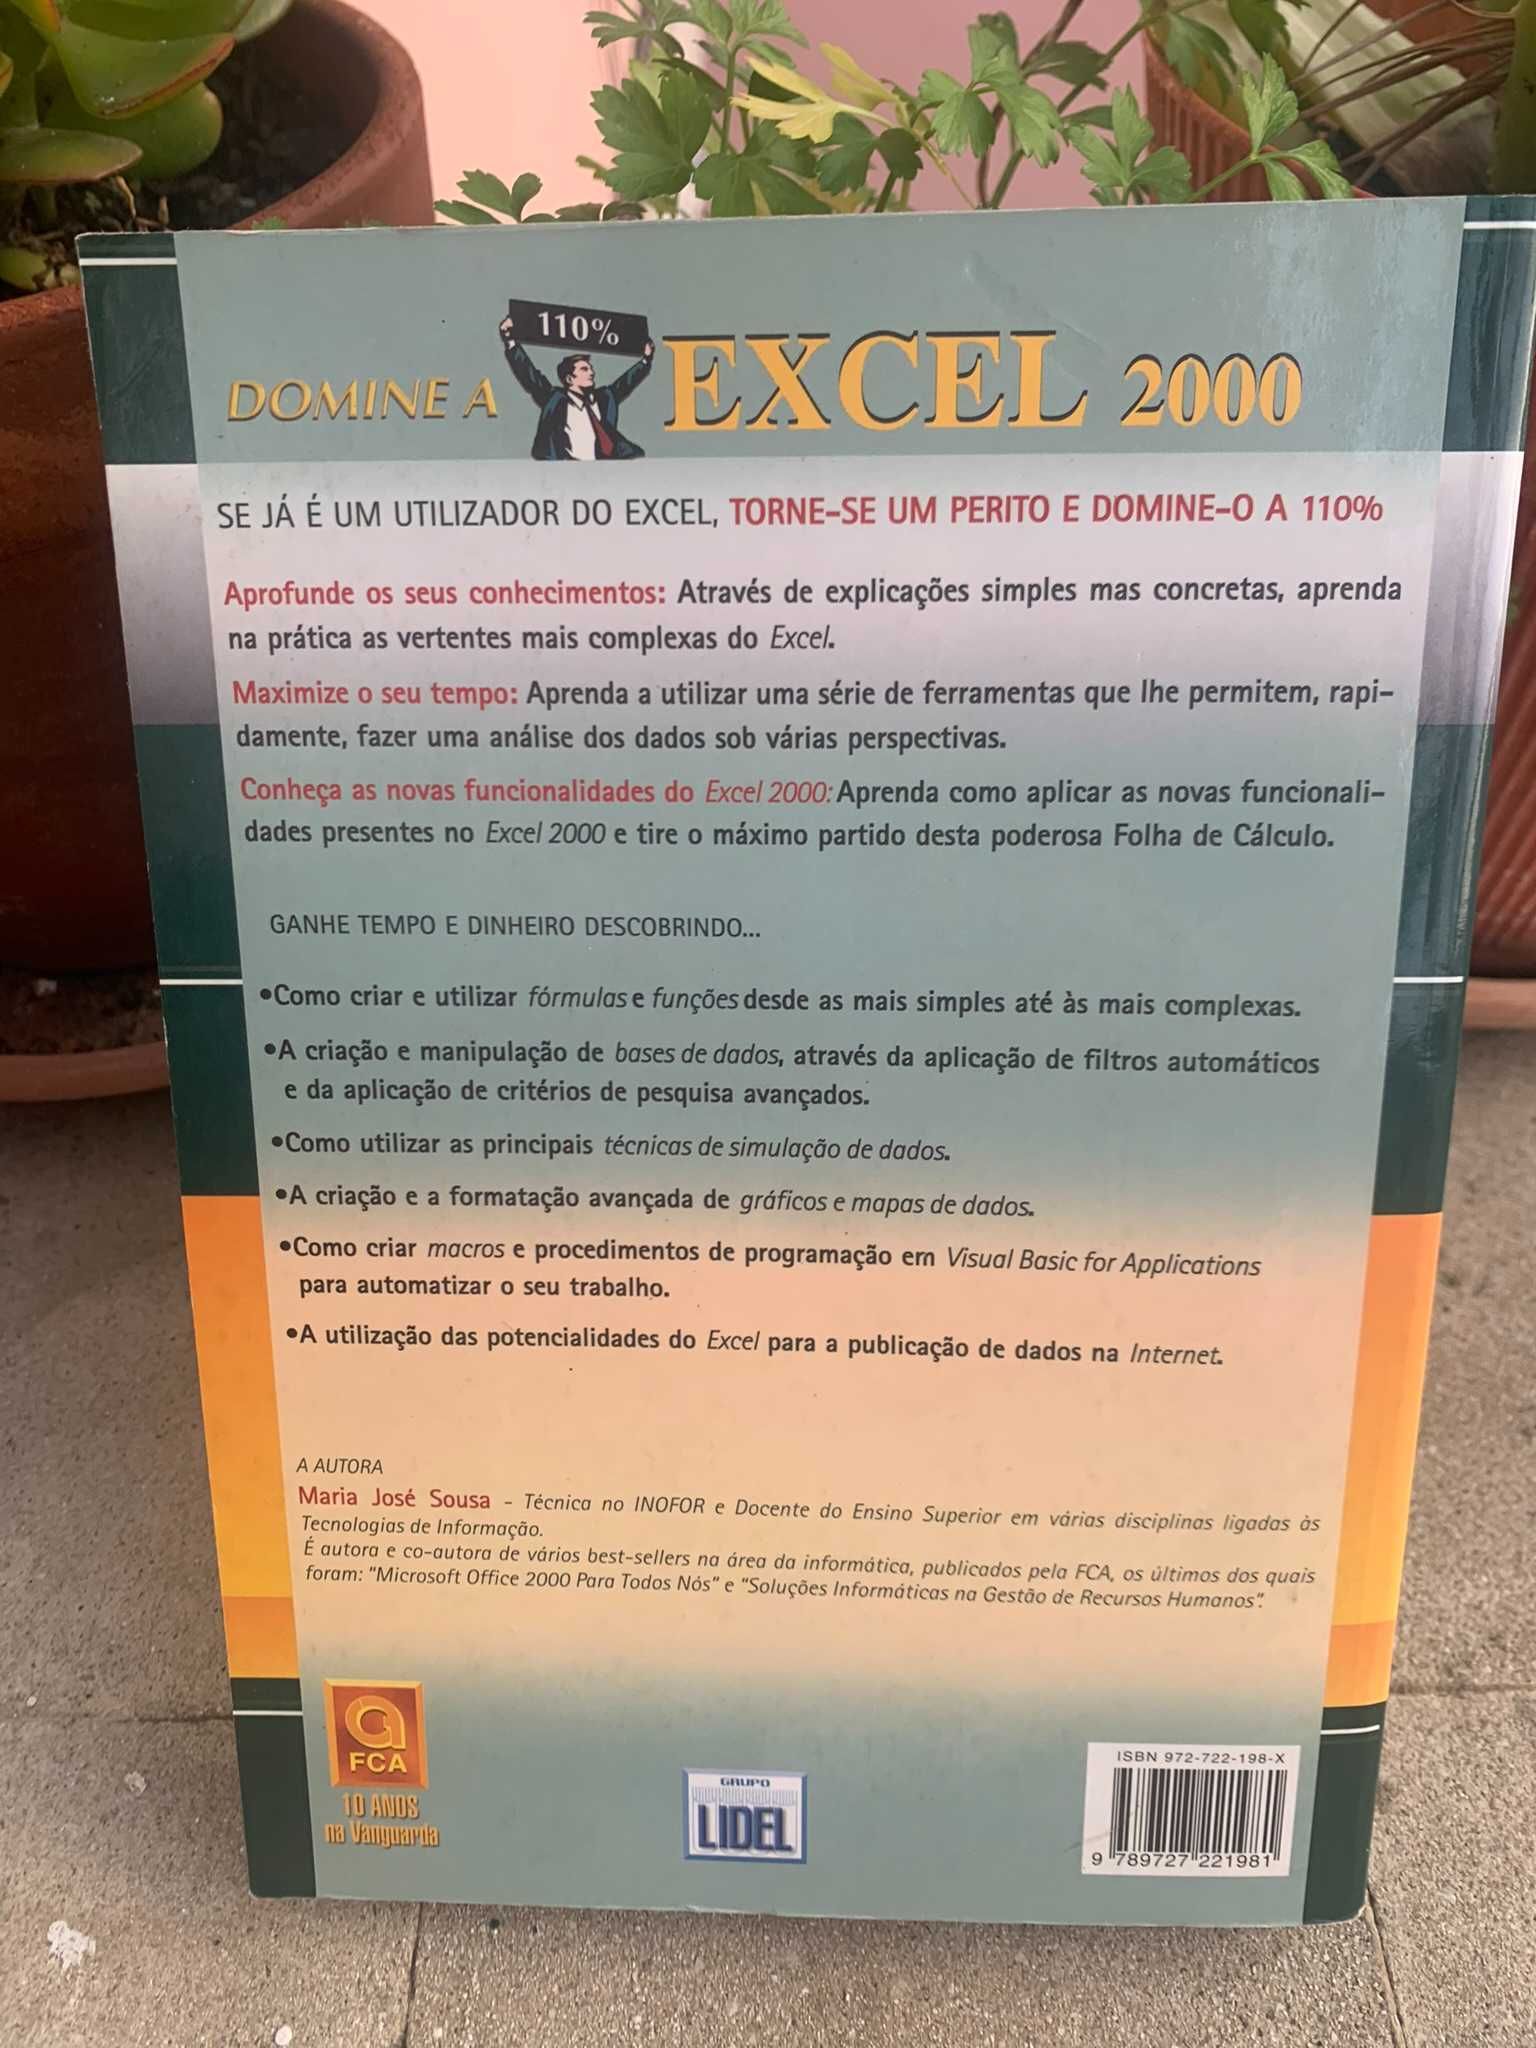 Domine a 110% Excel 2000